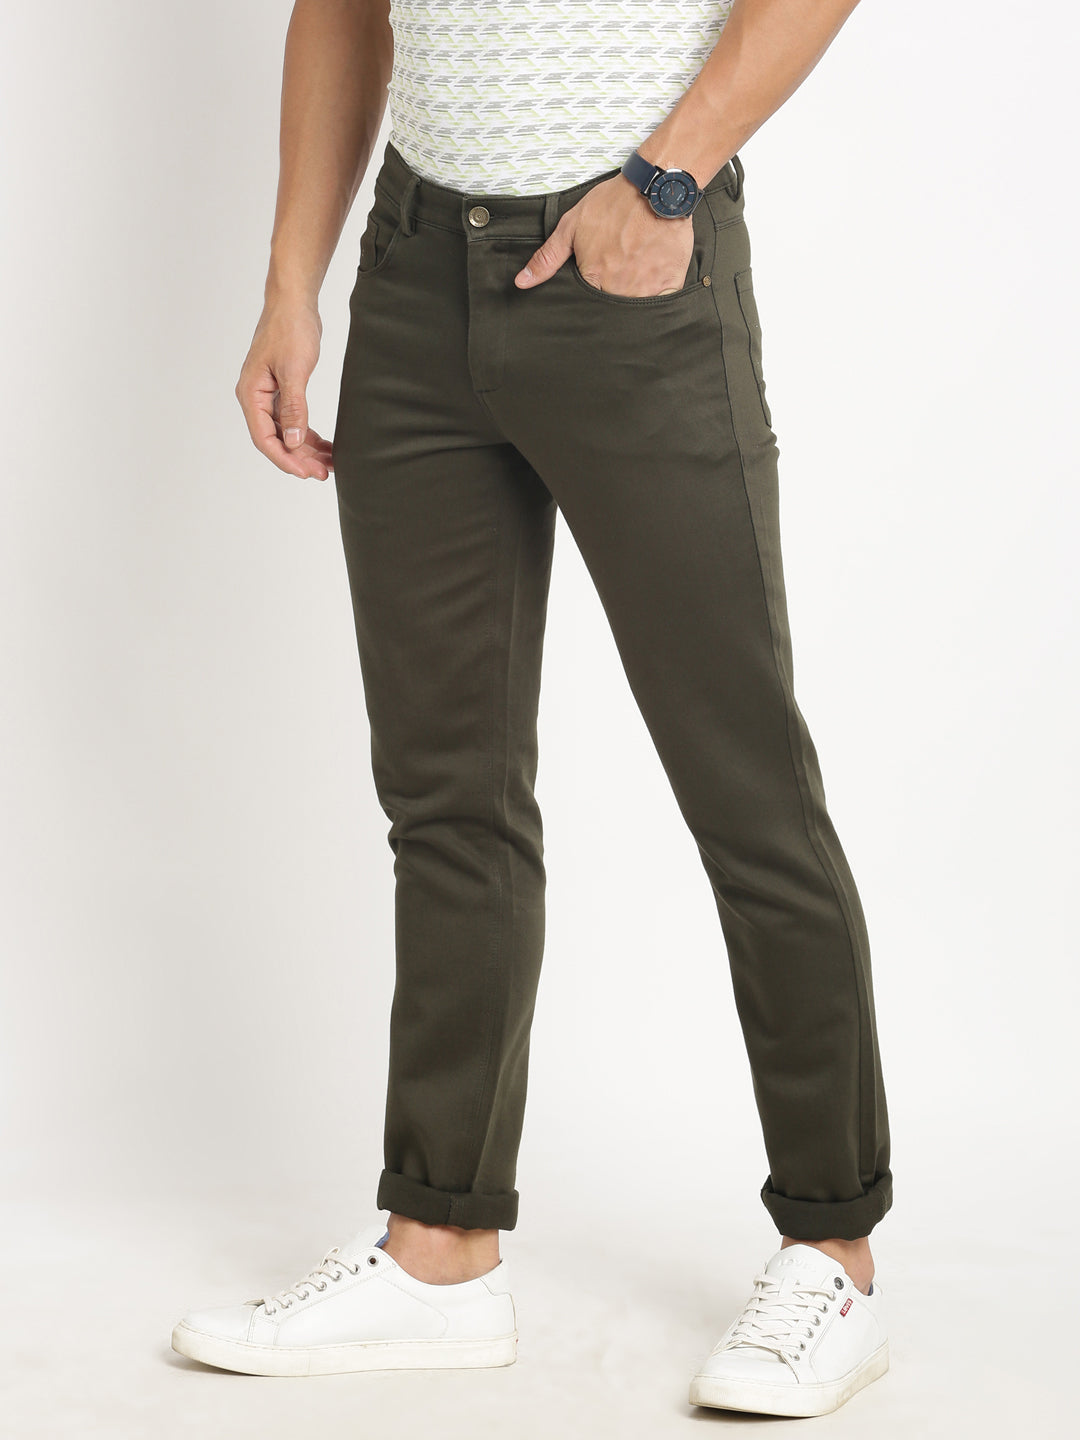 Cotton Stretch Olive Plain Narrow Fit Flat Front Casual Jeans